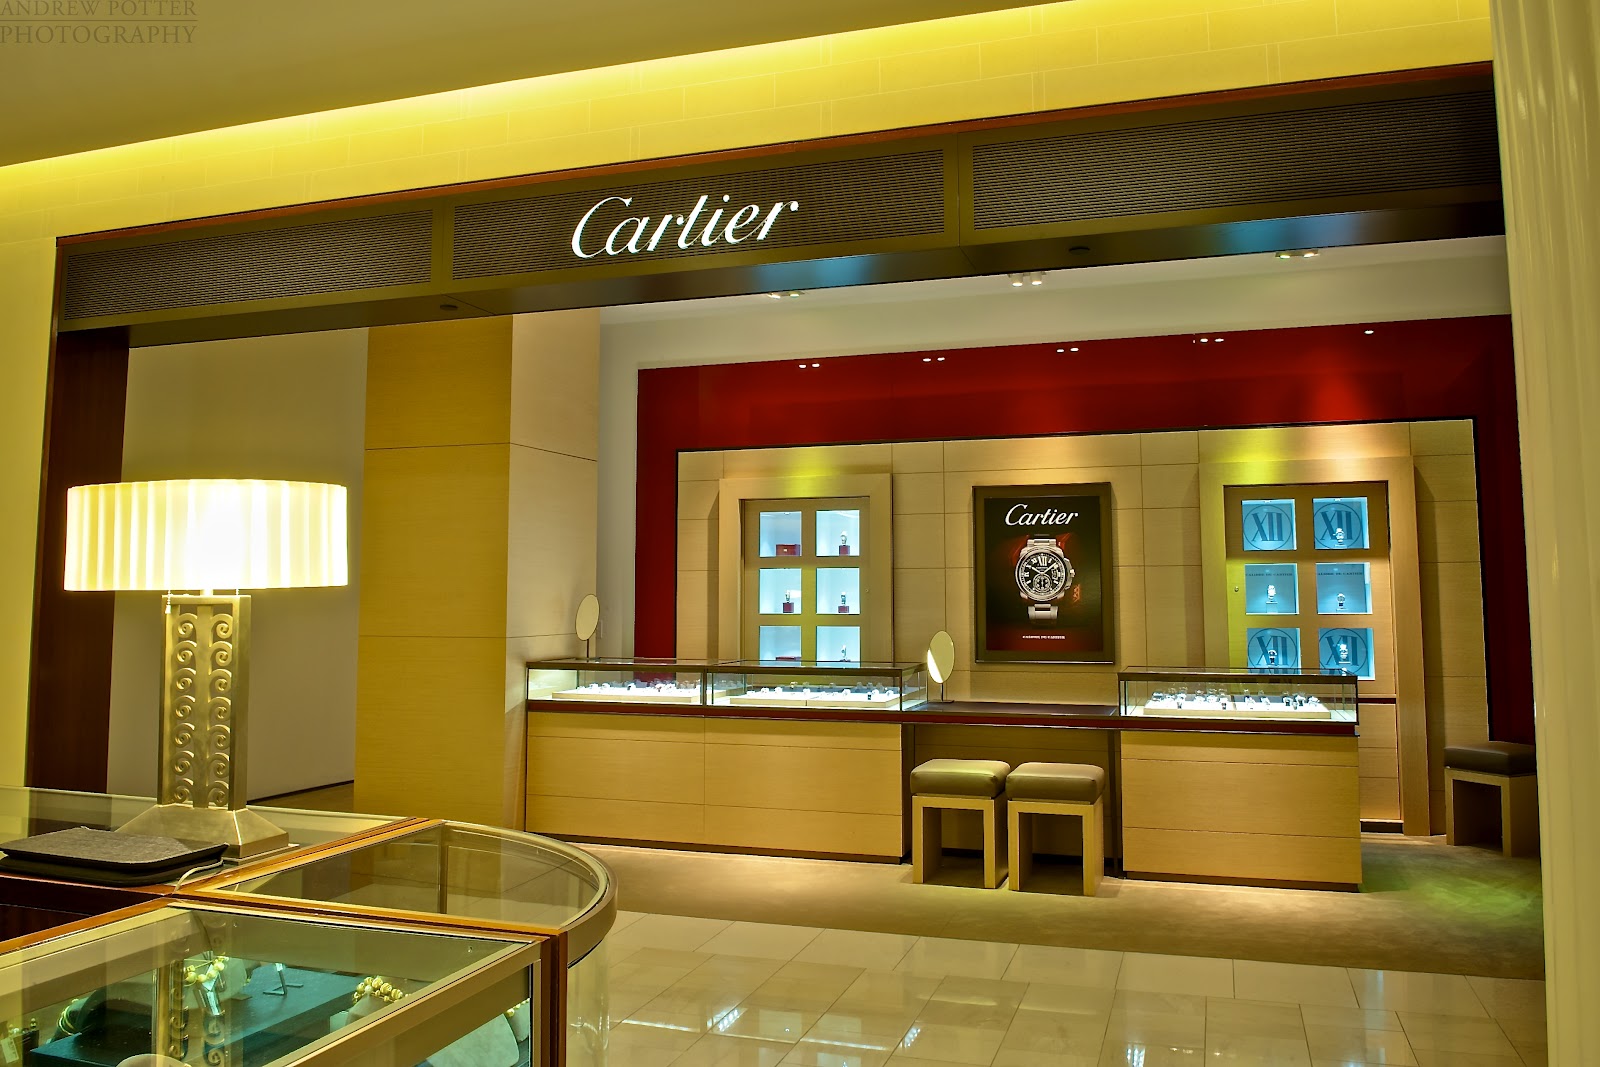 Andrew Potter Photo Blog: Cartier Saks Fifth Avenue Somerset Collection